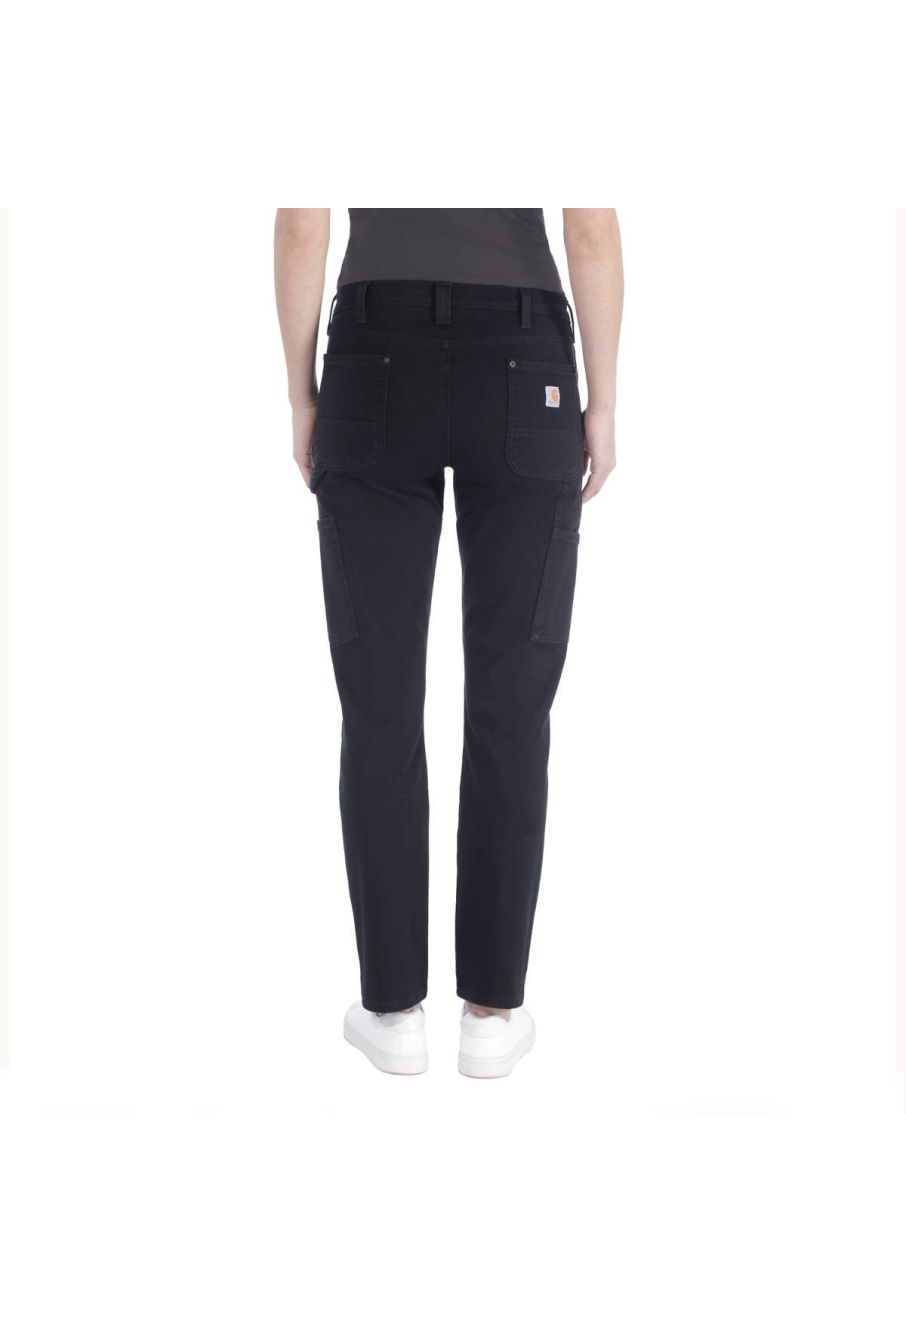 Carhartt 104296 Women's Stretch Twill Double Front Trousers - Black